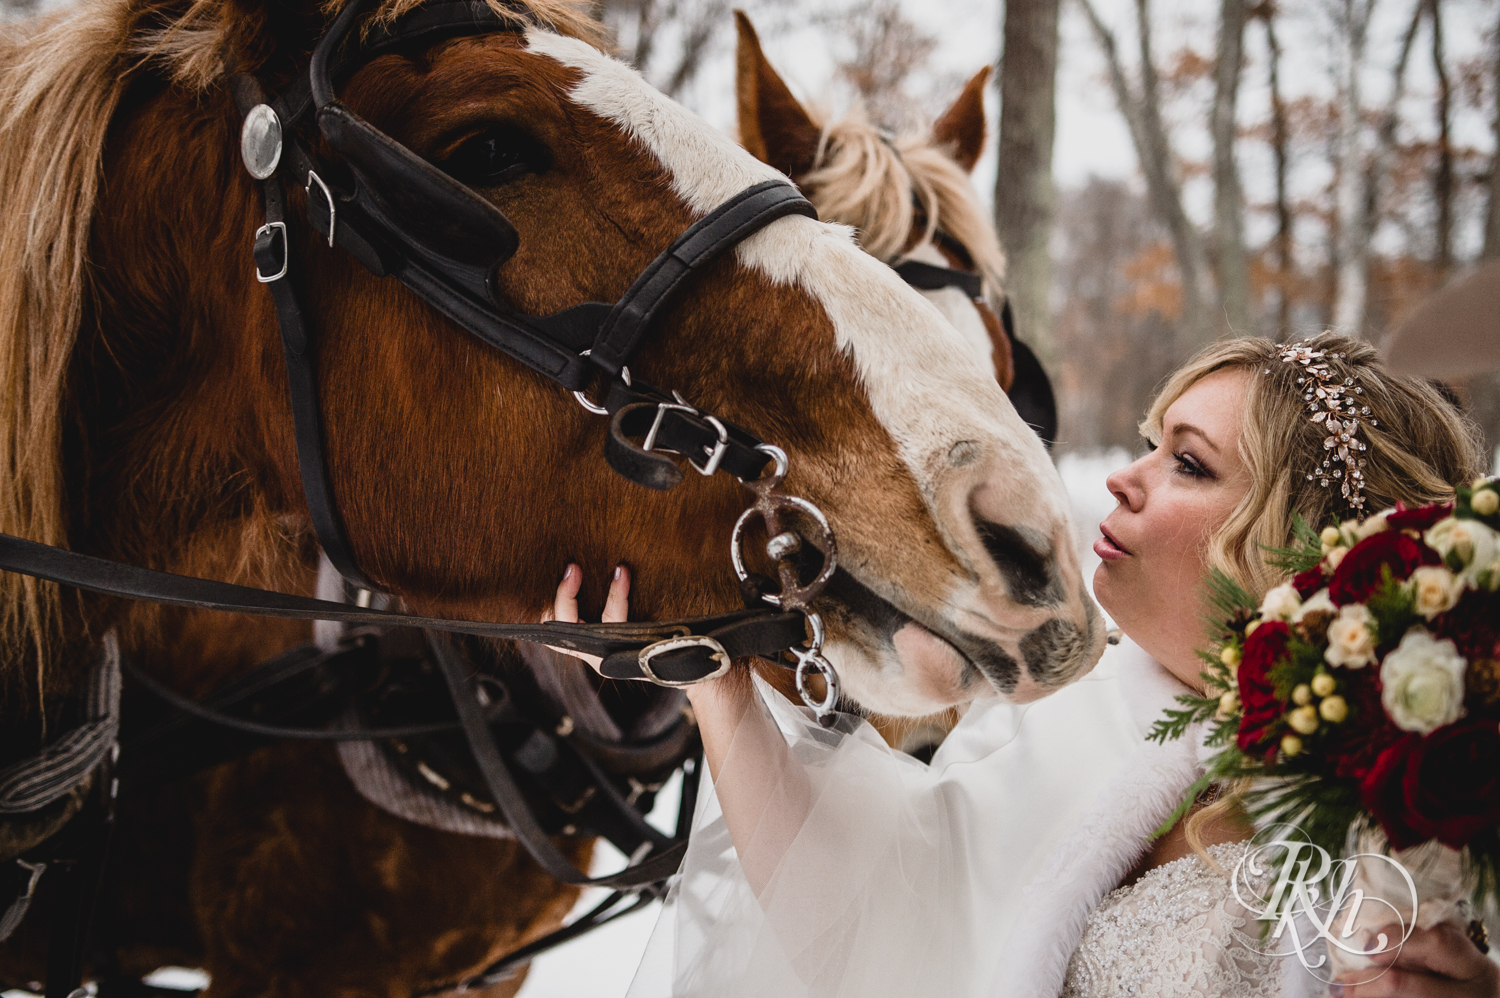 Bride coos horses during winter wedding at Whitefish Lodge in Crosslake, Minnesota.